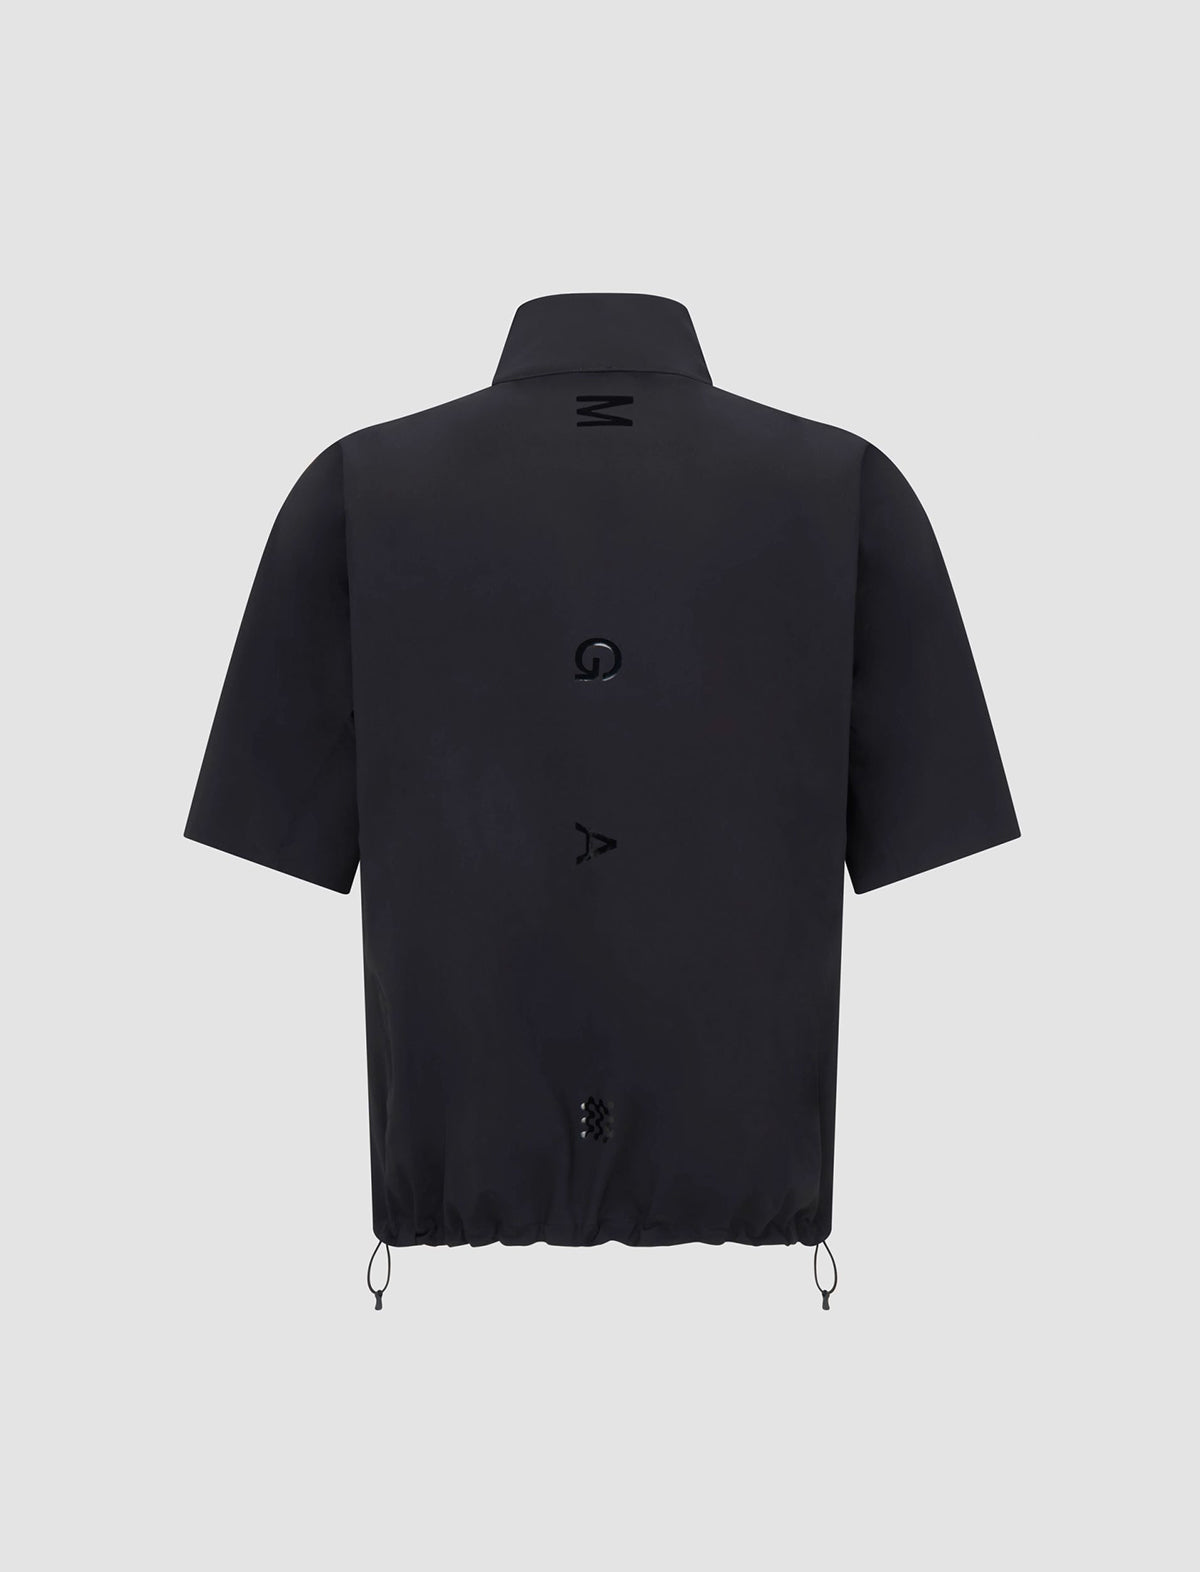 MANORS GOLF 2.5L Breathable Waterproof Shirt in Black